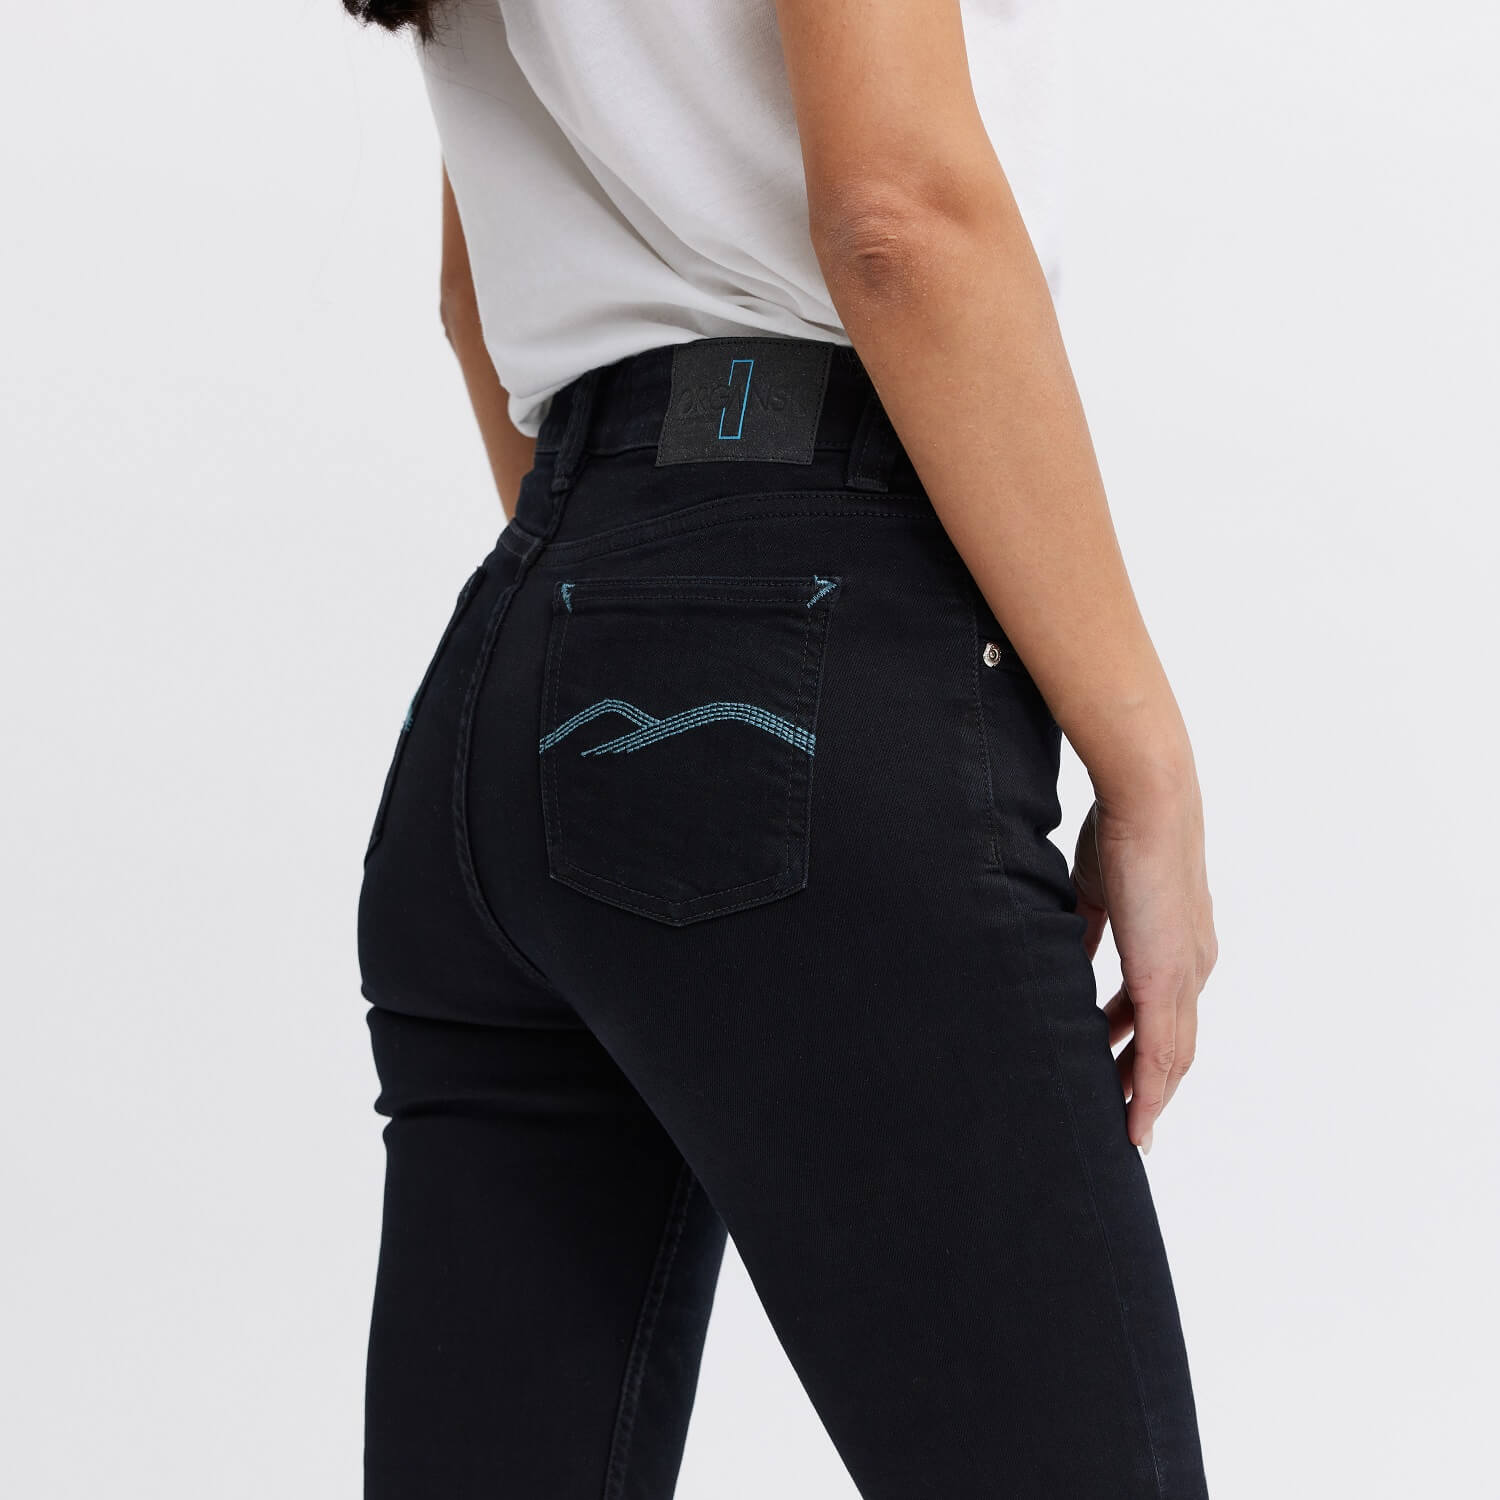 Skinny Fit Jeans | Mid rise to High waisted Slim fits | Women’s Denim ...